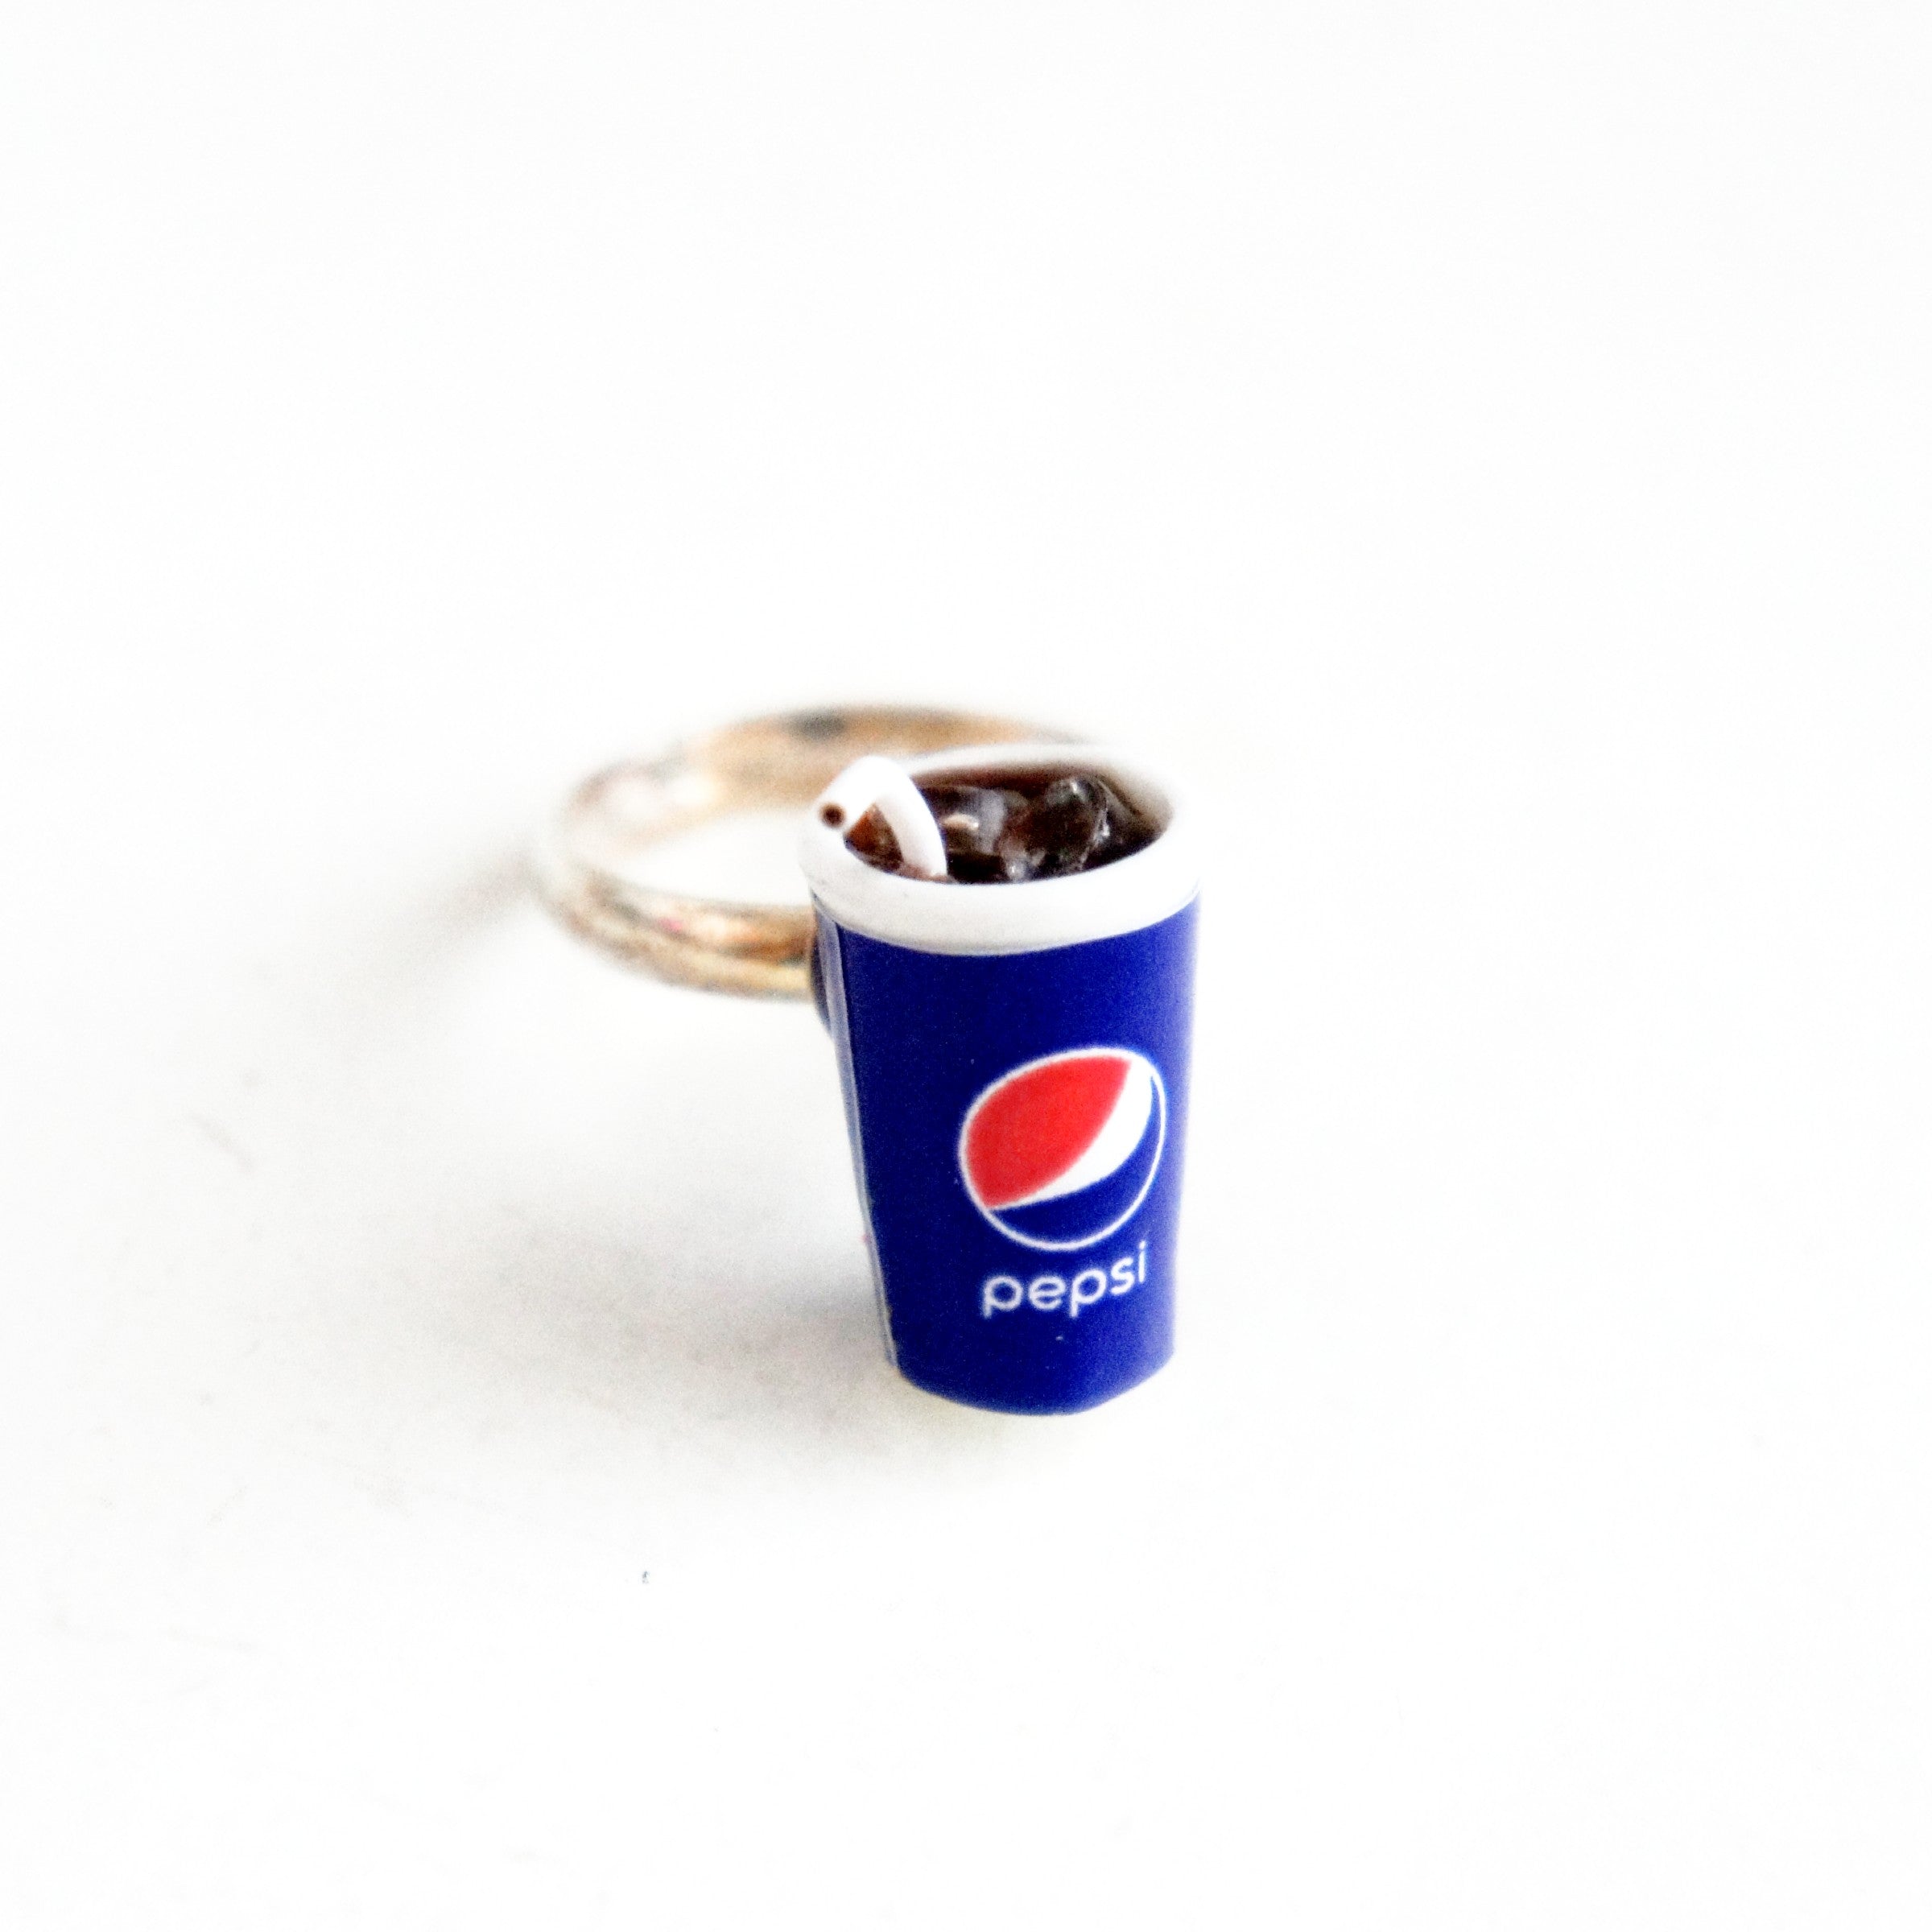 Pepsi Soda Ring - Jillicious charms and accessories